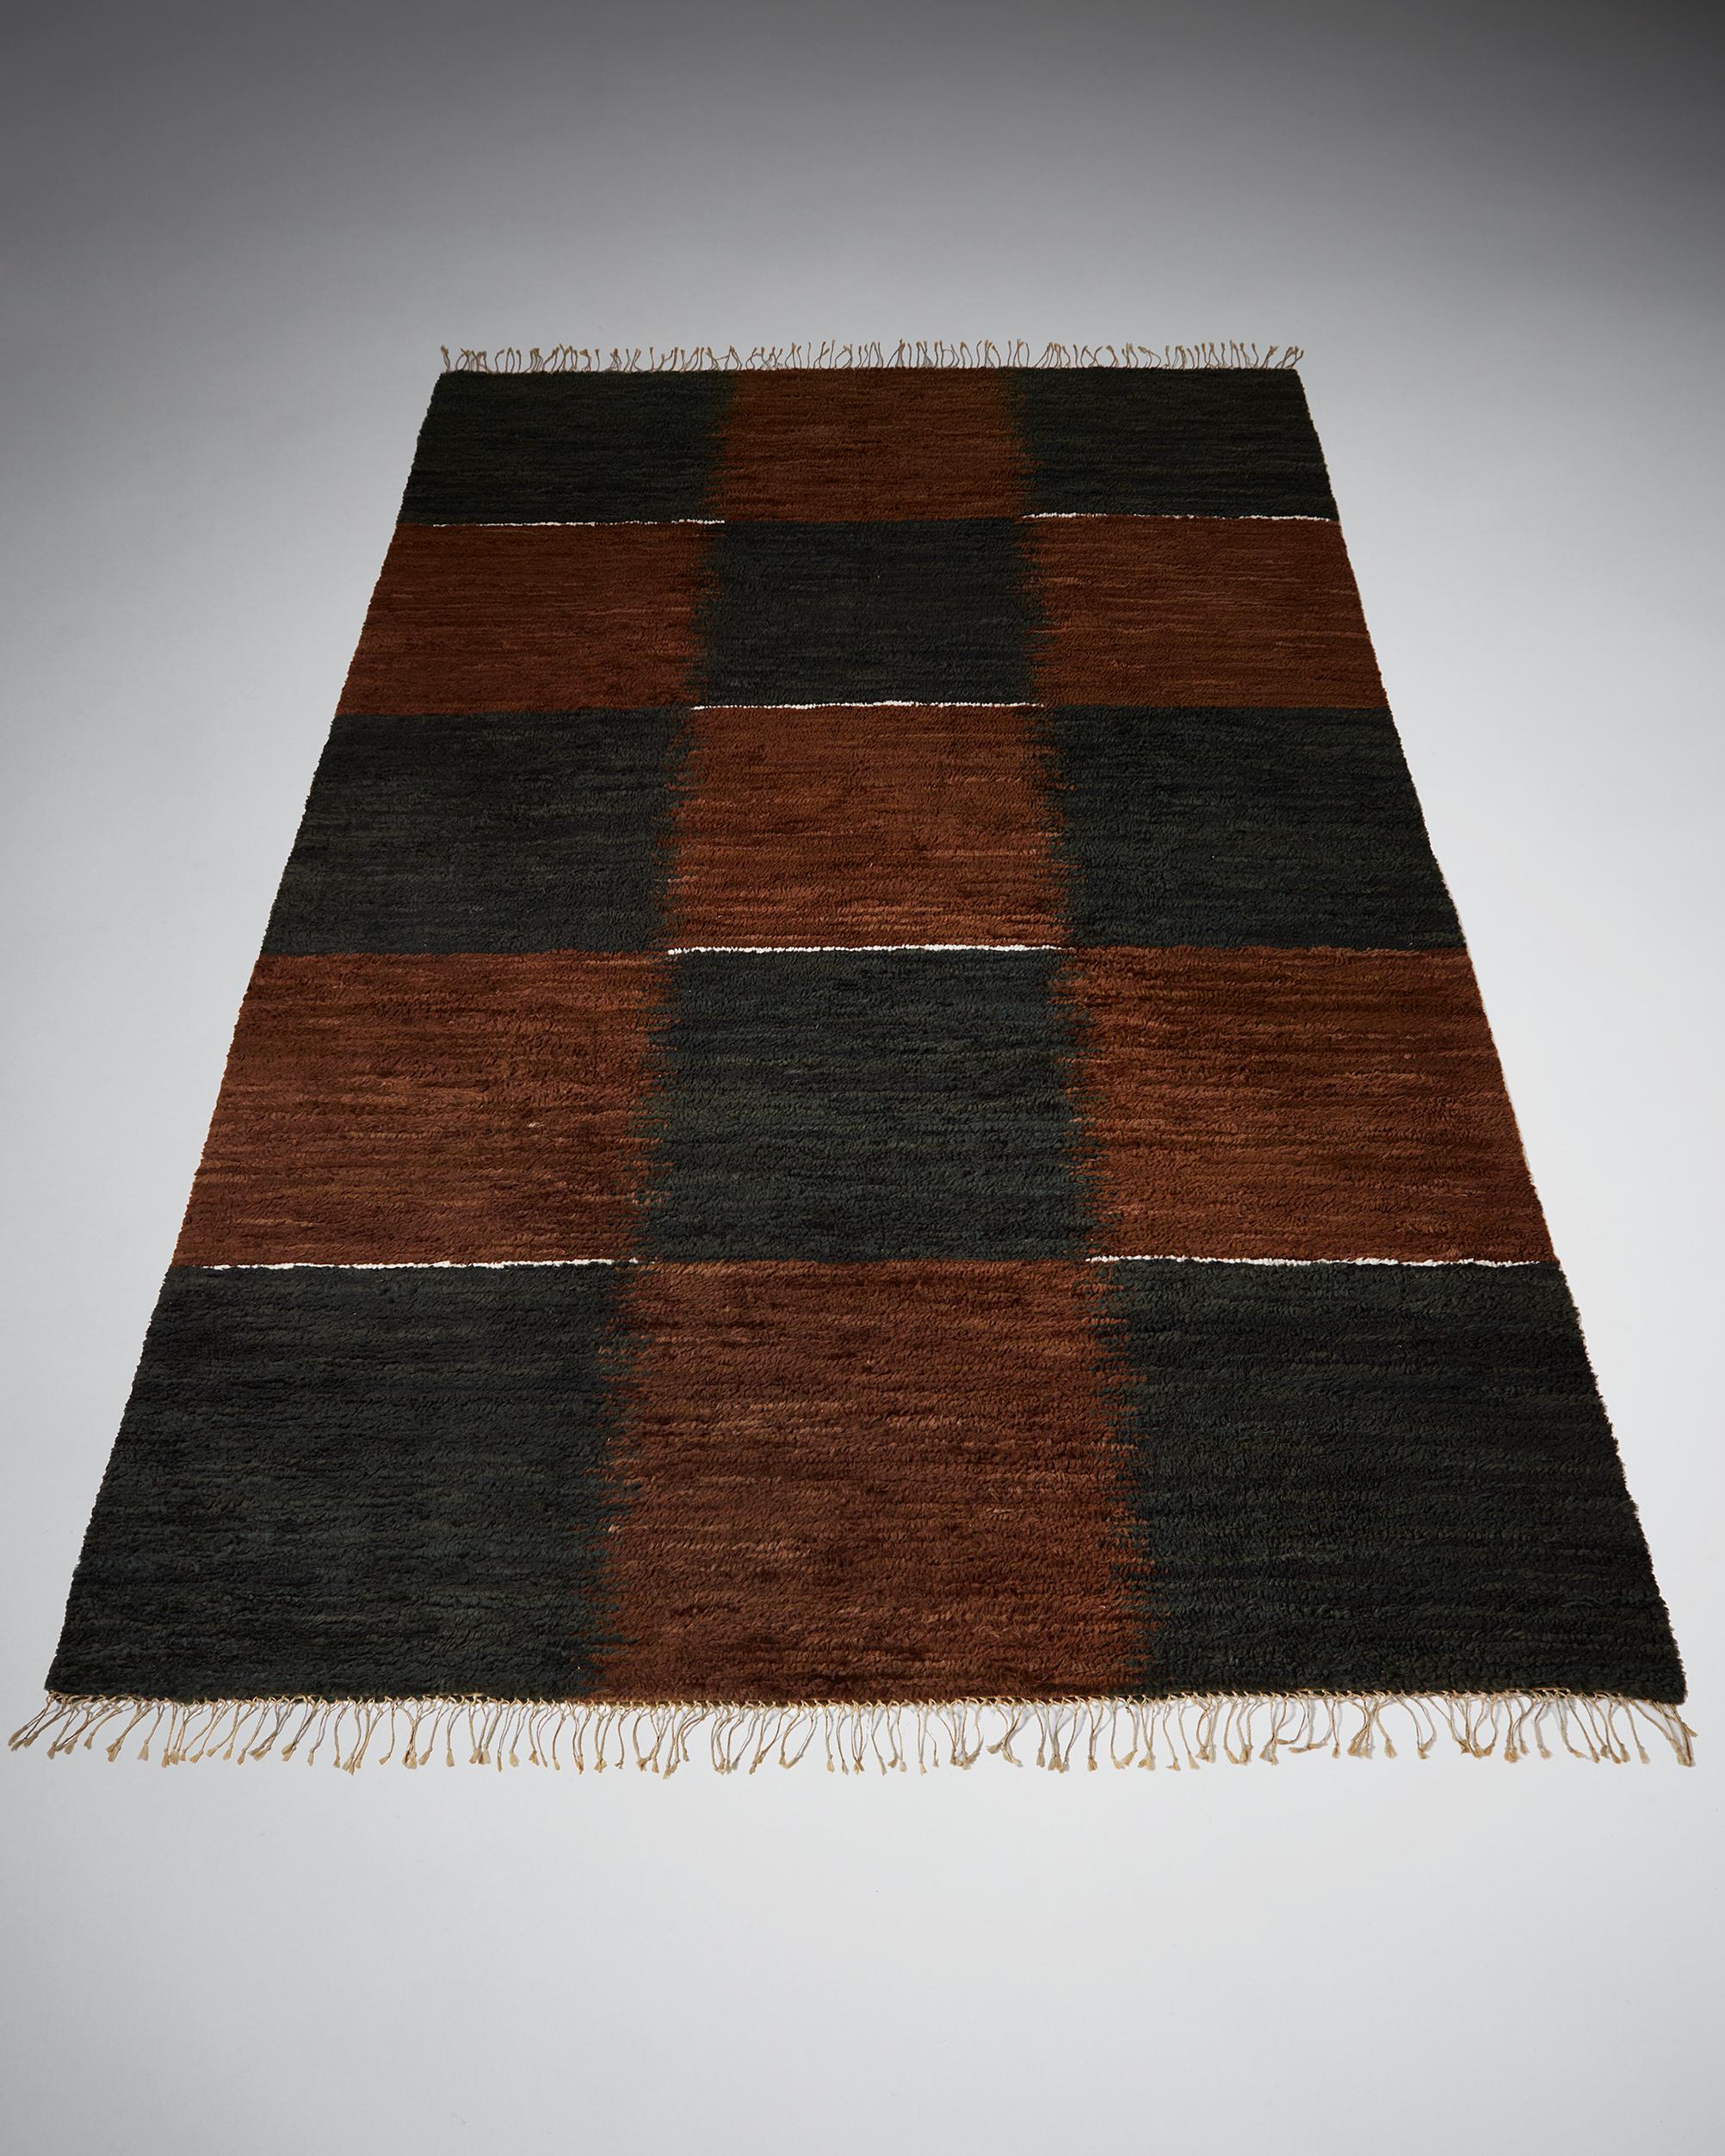 Rug, anonymous,
Finland, 1950s.
Woven sheepskin.

Retailed by Artek, Finland.

Measures: L 400 cm/ 13' 2